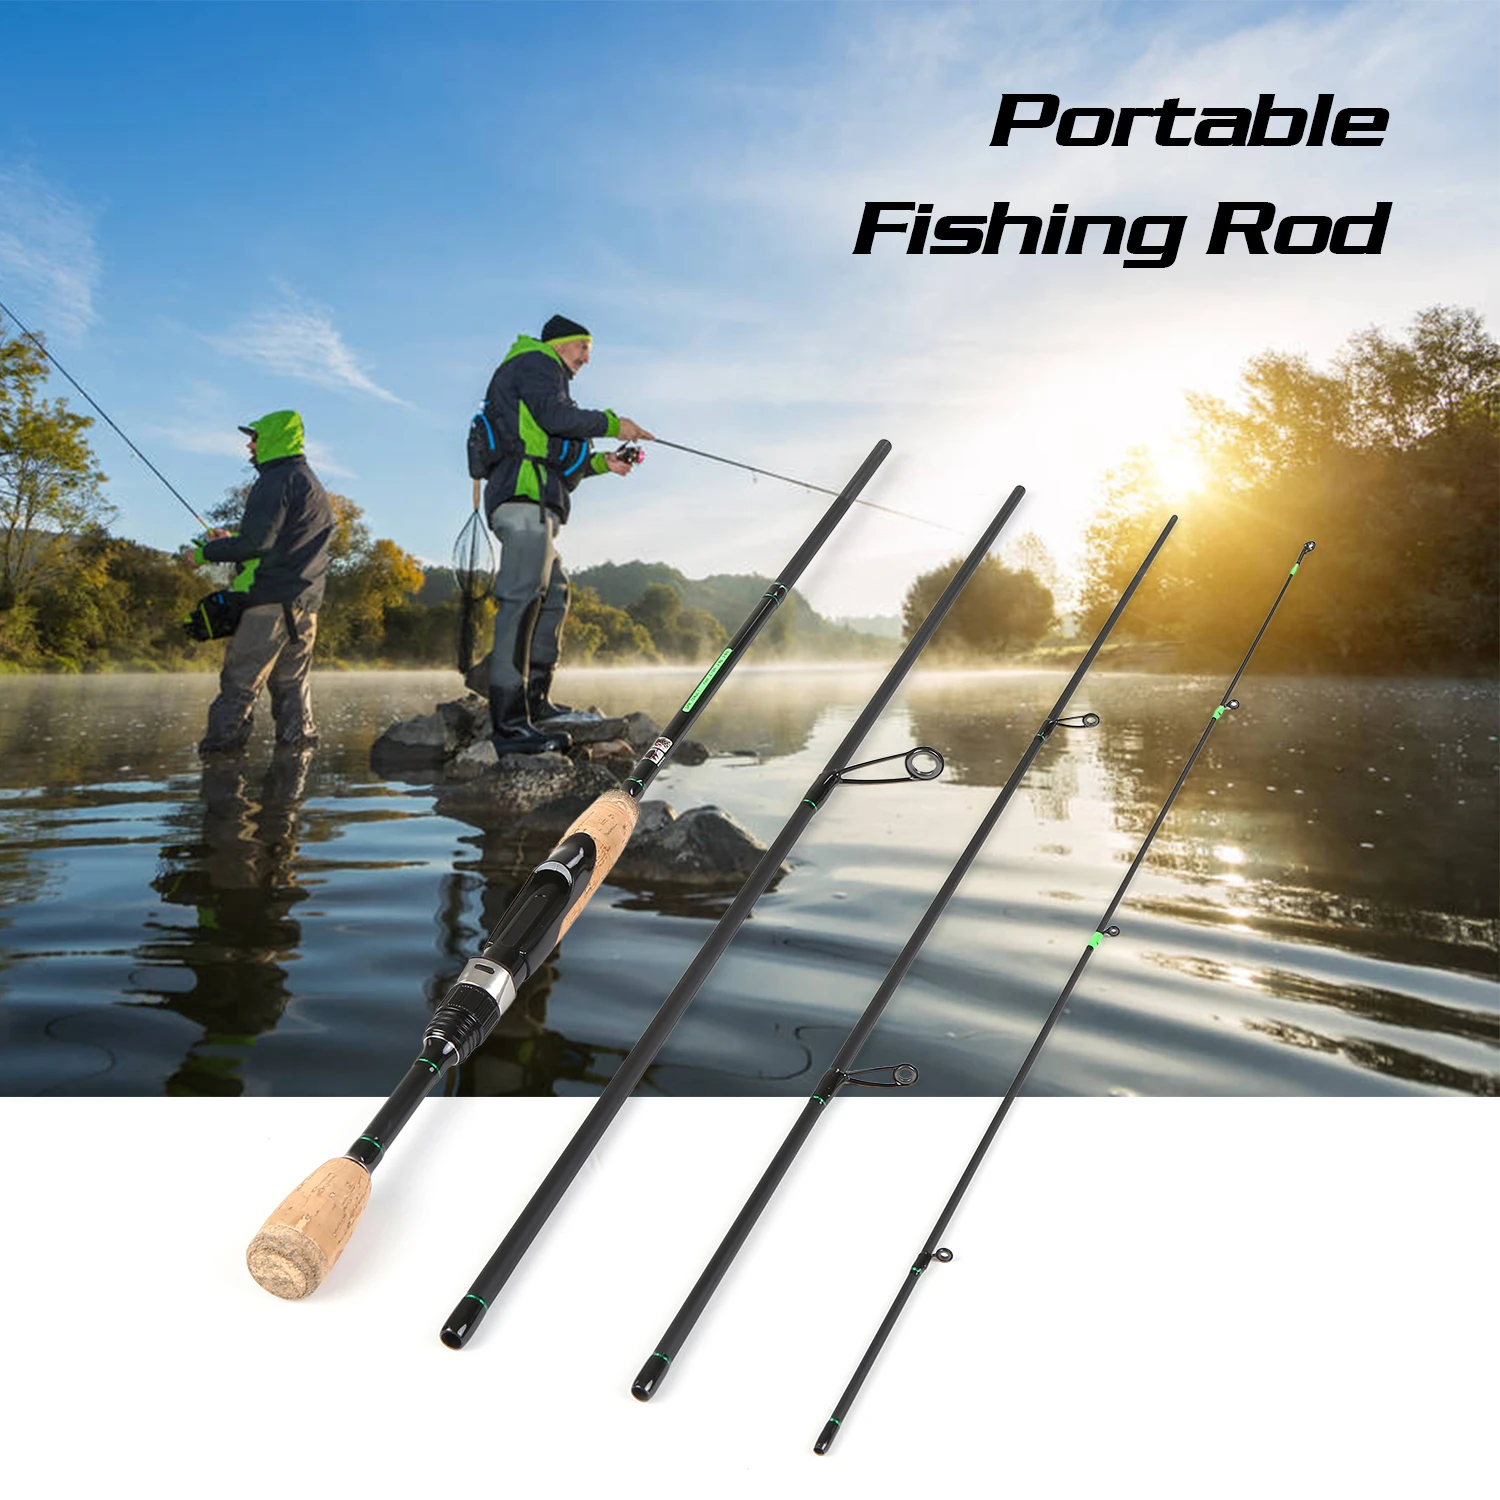 Portable 6+1 Travel Spinning Fishing Rod Casting Lure Rod 19.6/2.1/2.1m Lightweight Carbon Fiber 4 Pieces Fishing Pesca Pole